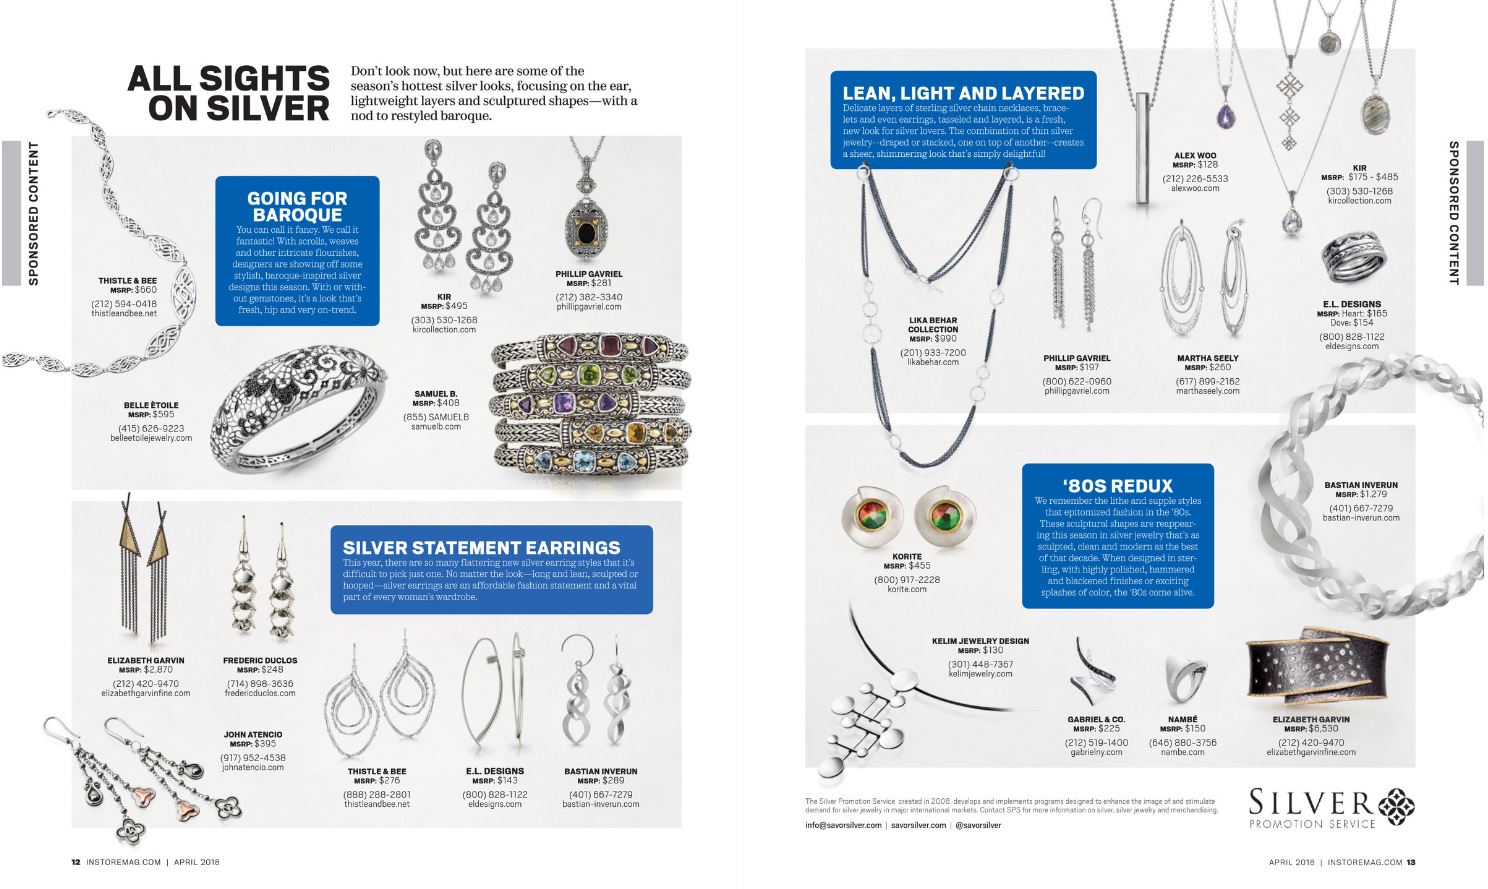 INSTORE Magazine, April 2018 issue, The Silver Promotion Service - All Sights on Silver